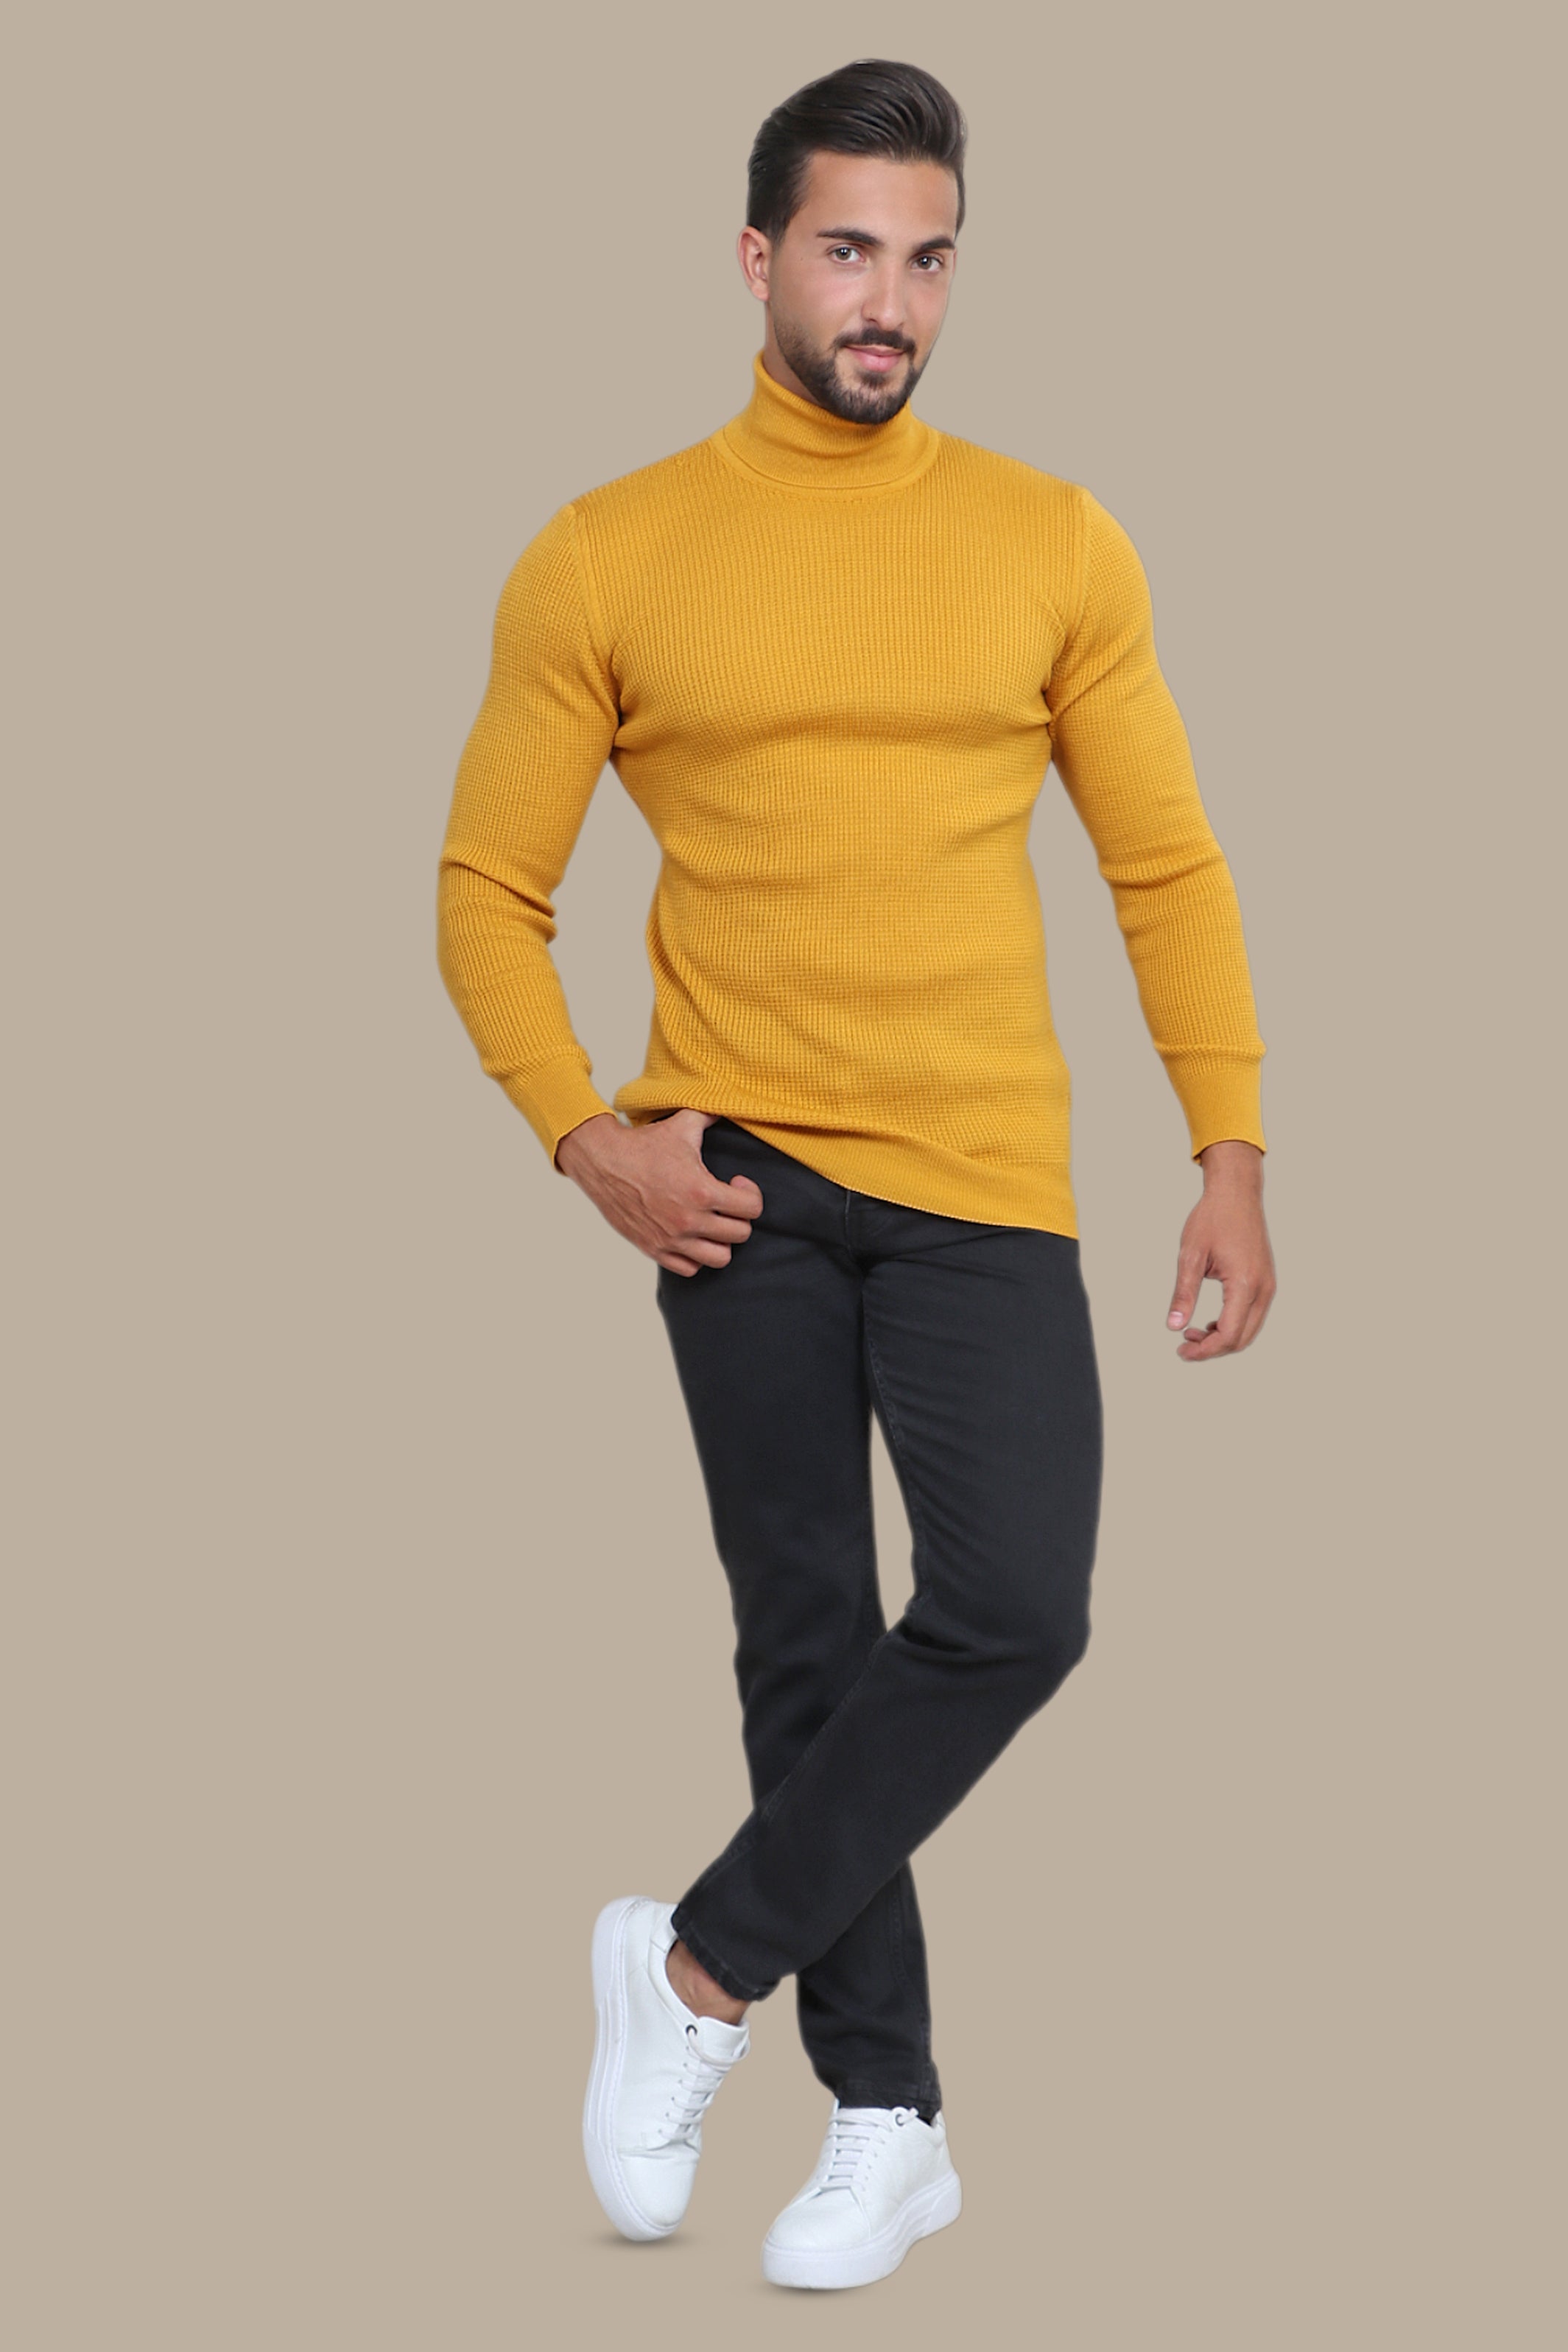 Mustard Turtle Neck Structured Sweater: A Cozy Must-Have